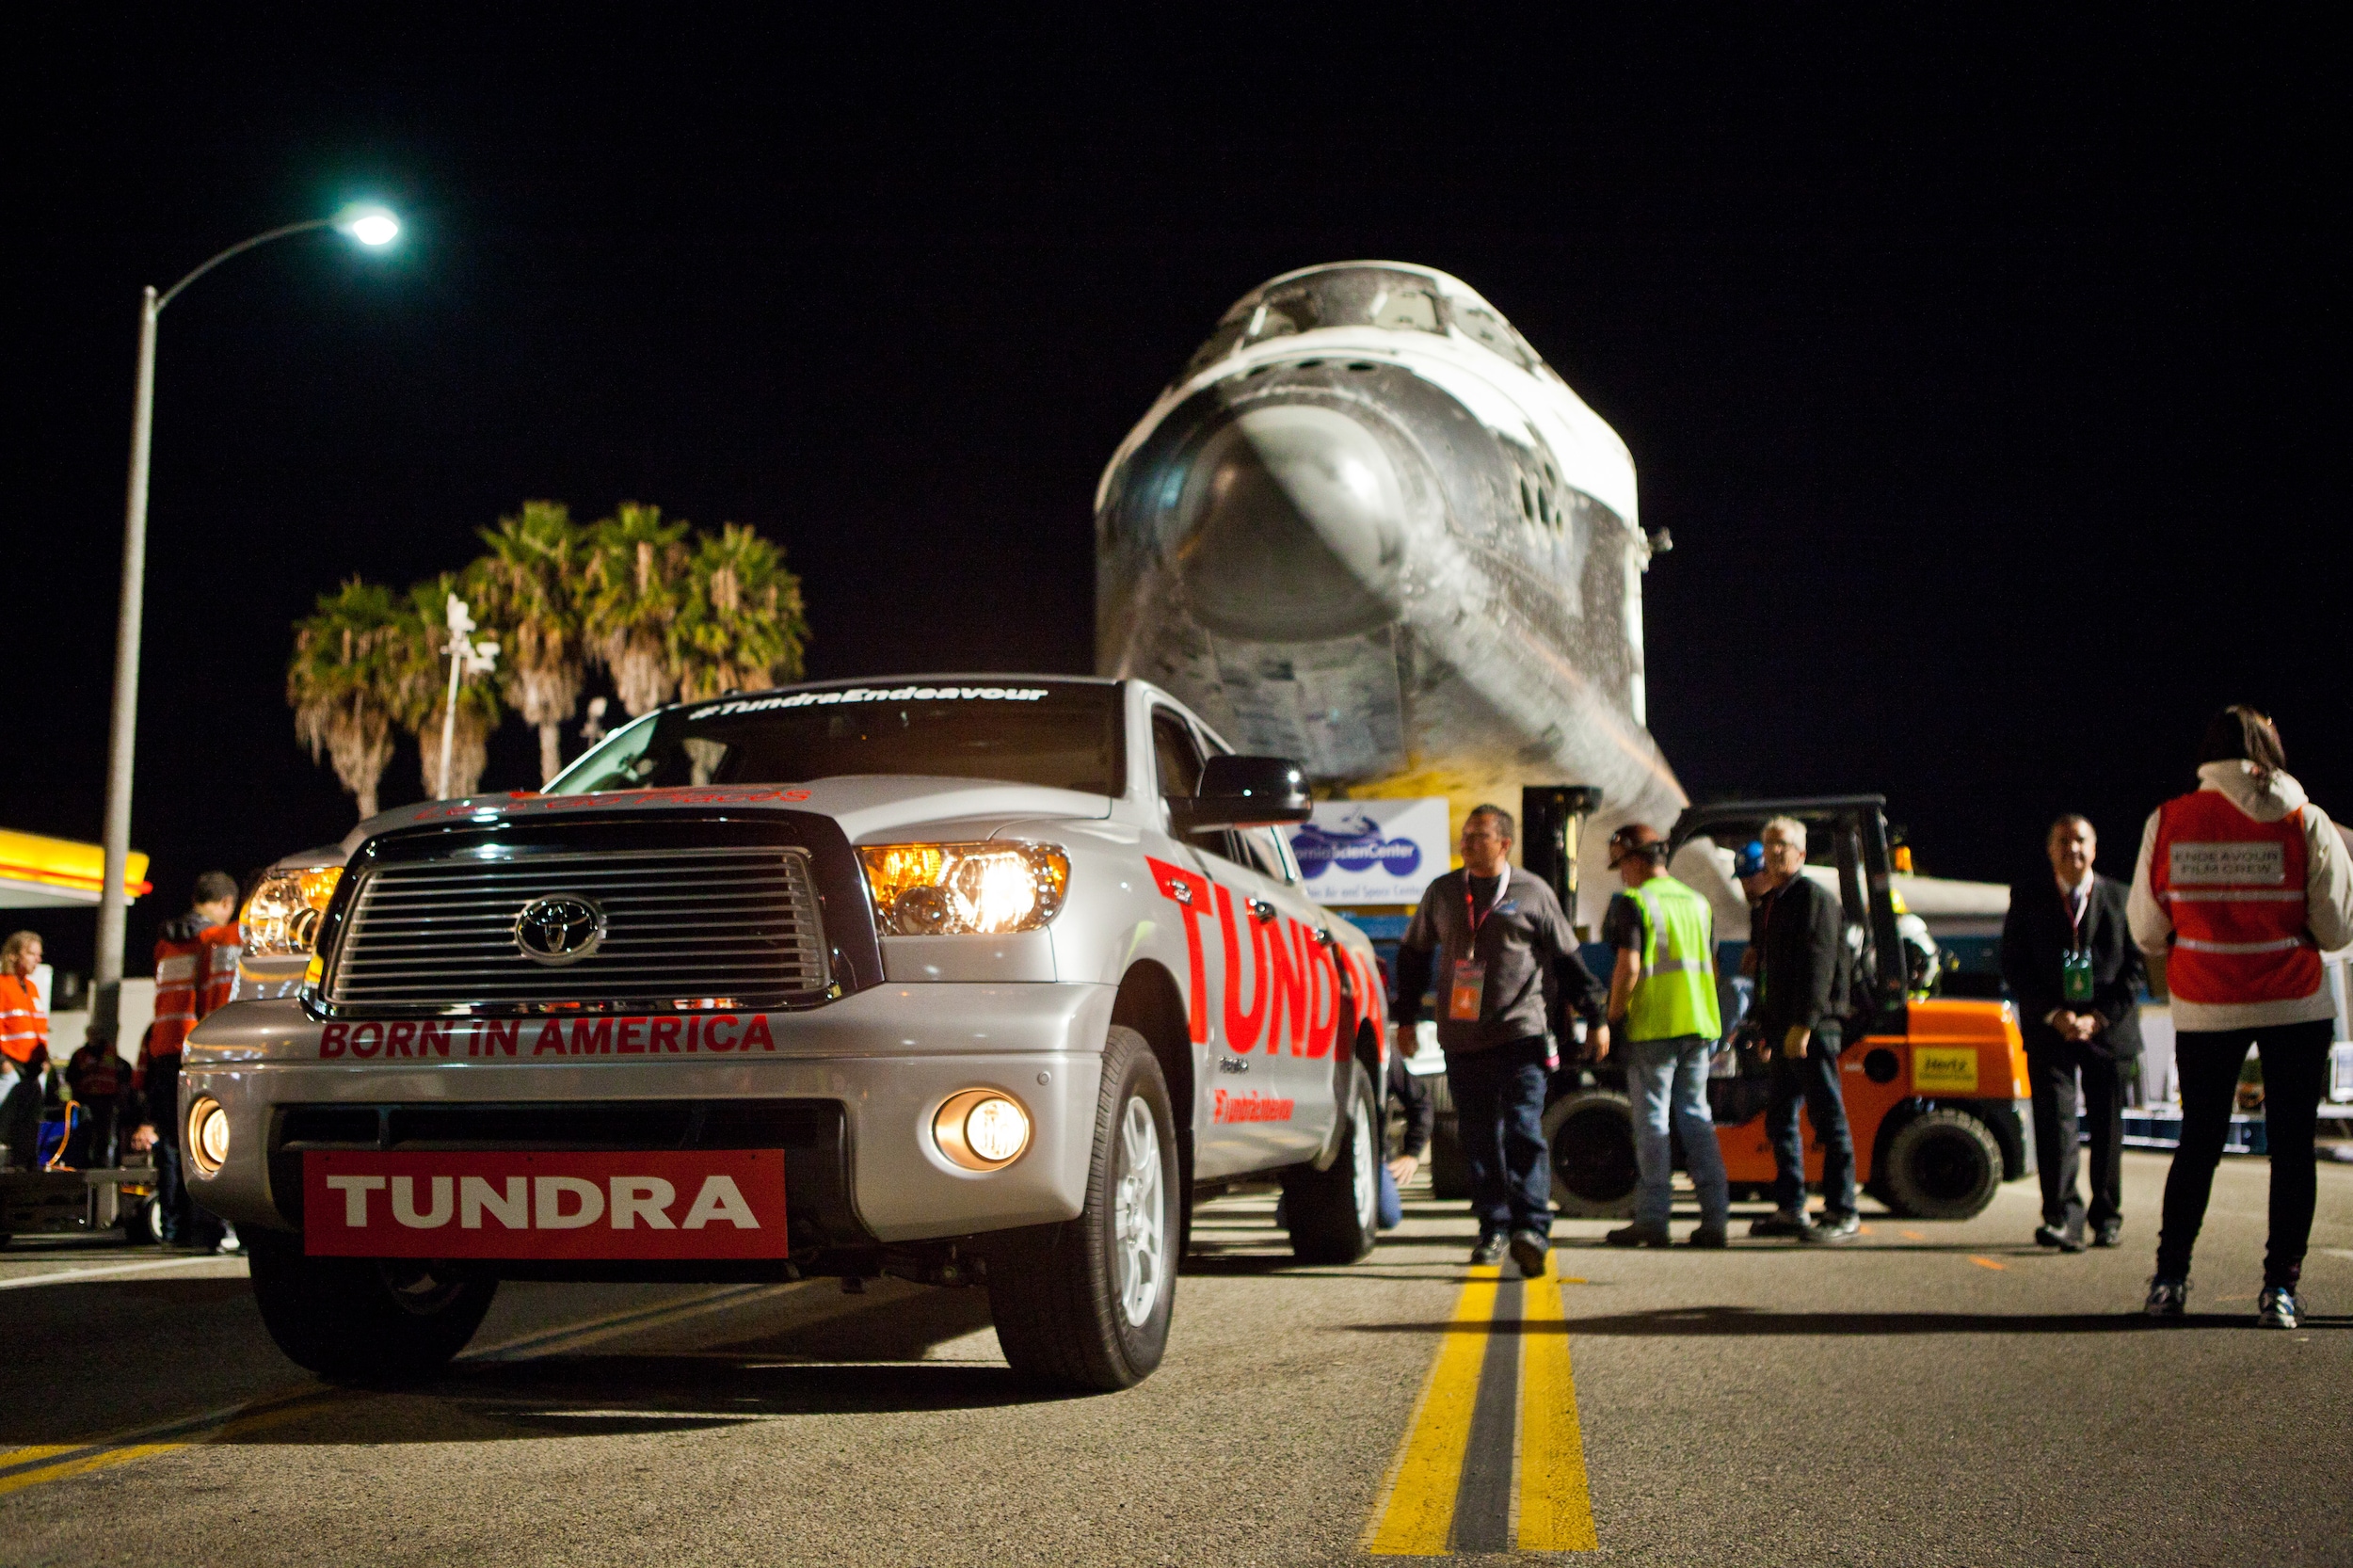 How did the toyota tundra tow the space shuttle